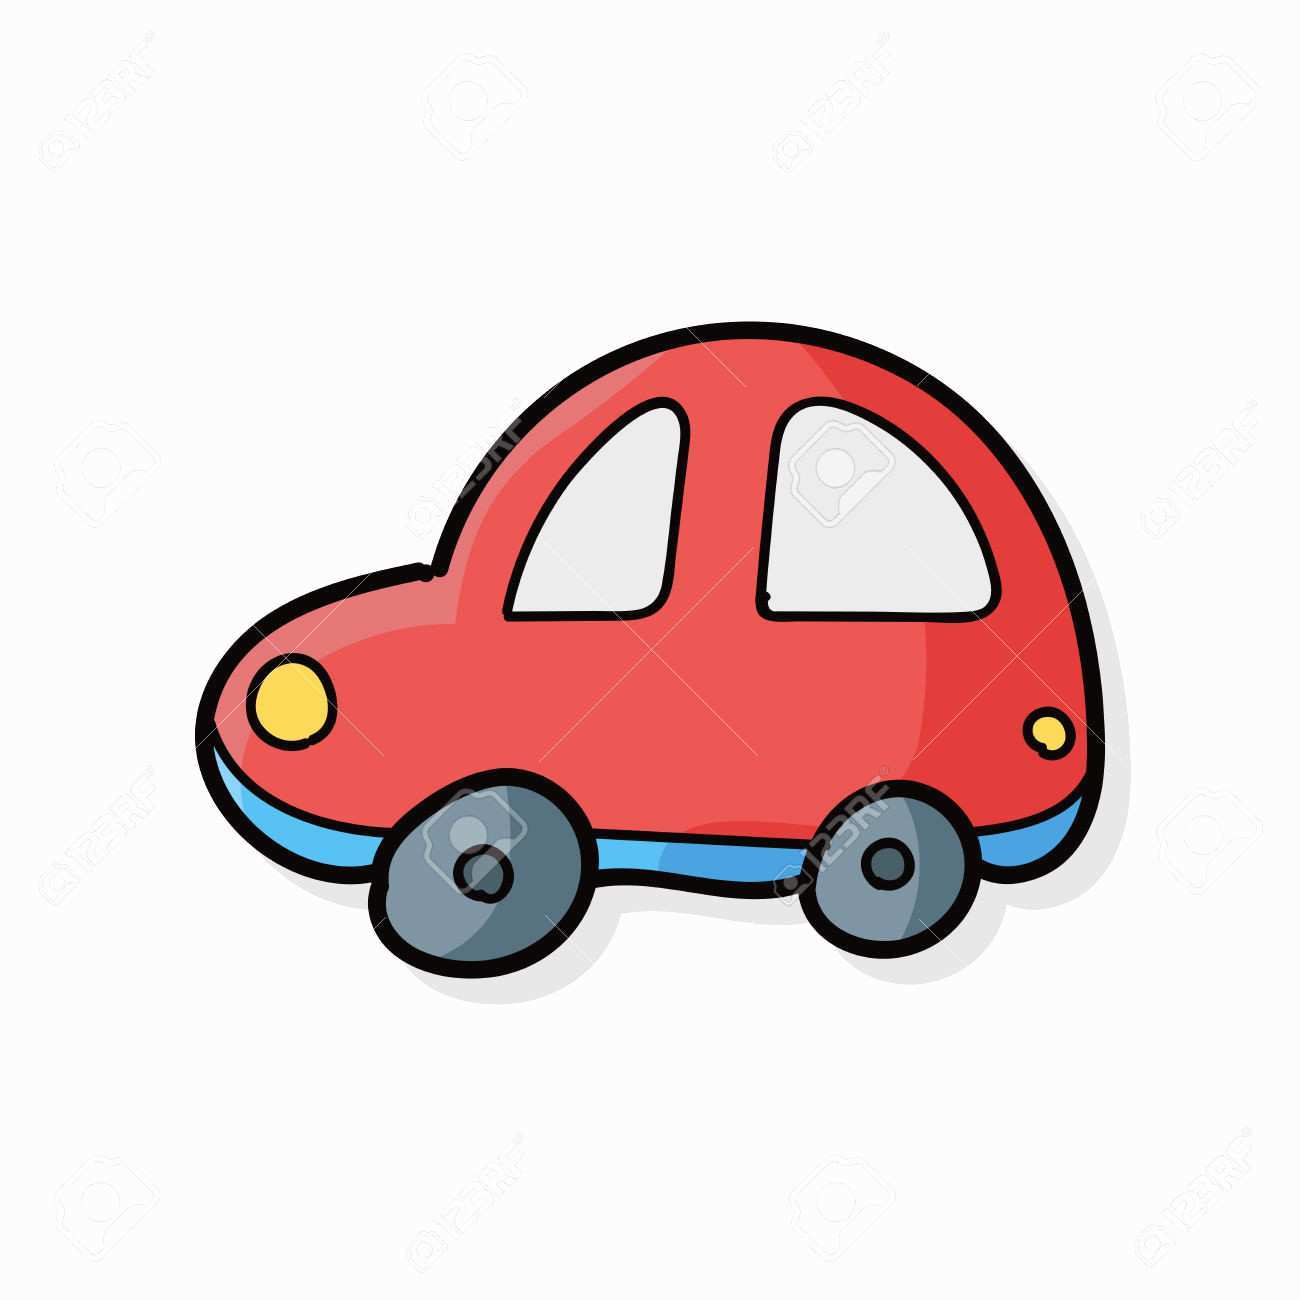 Collection of Toy car clipart | Free download best Toy car clipart on